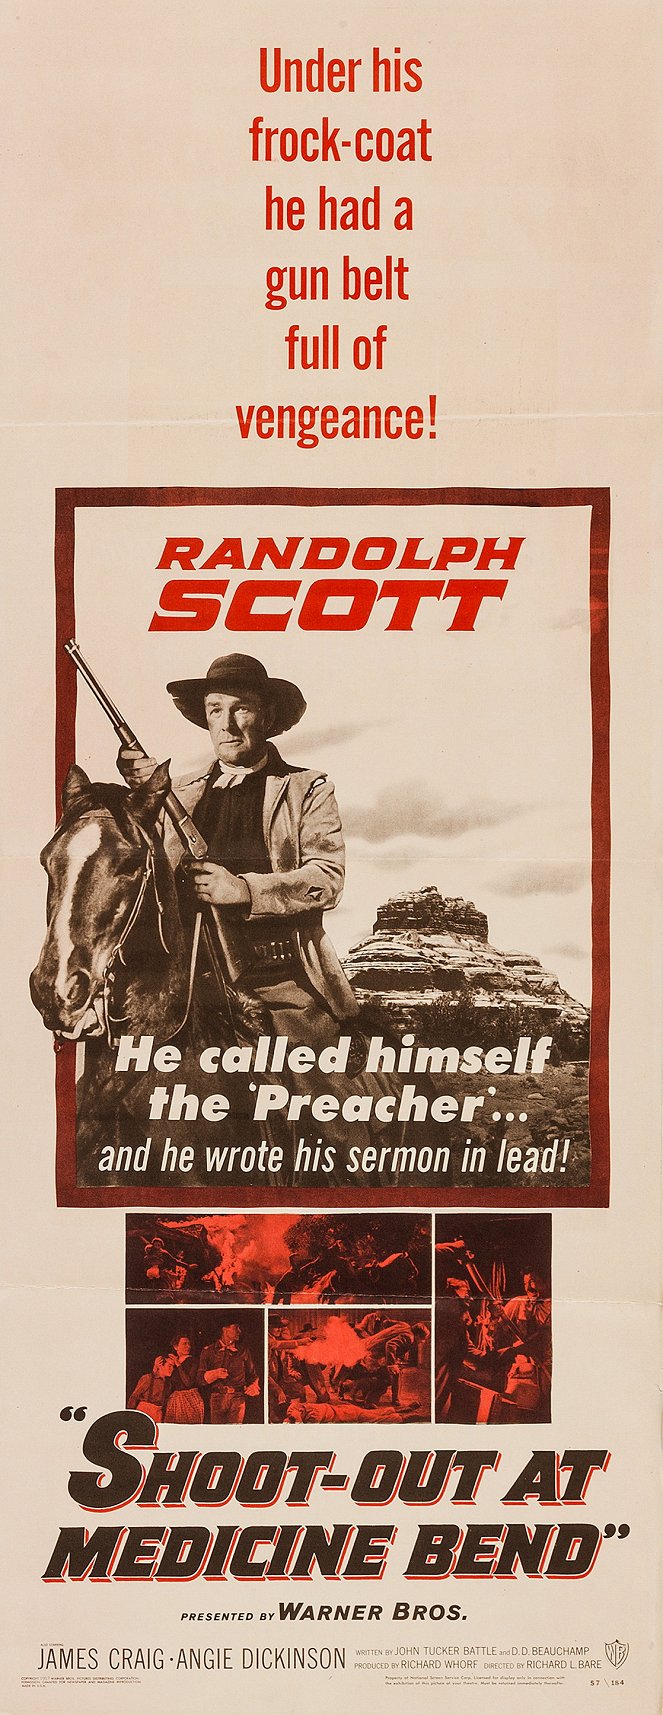 Shoot-Out at Medicine Bend - Posters